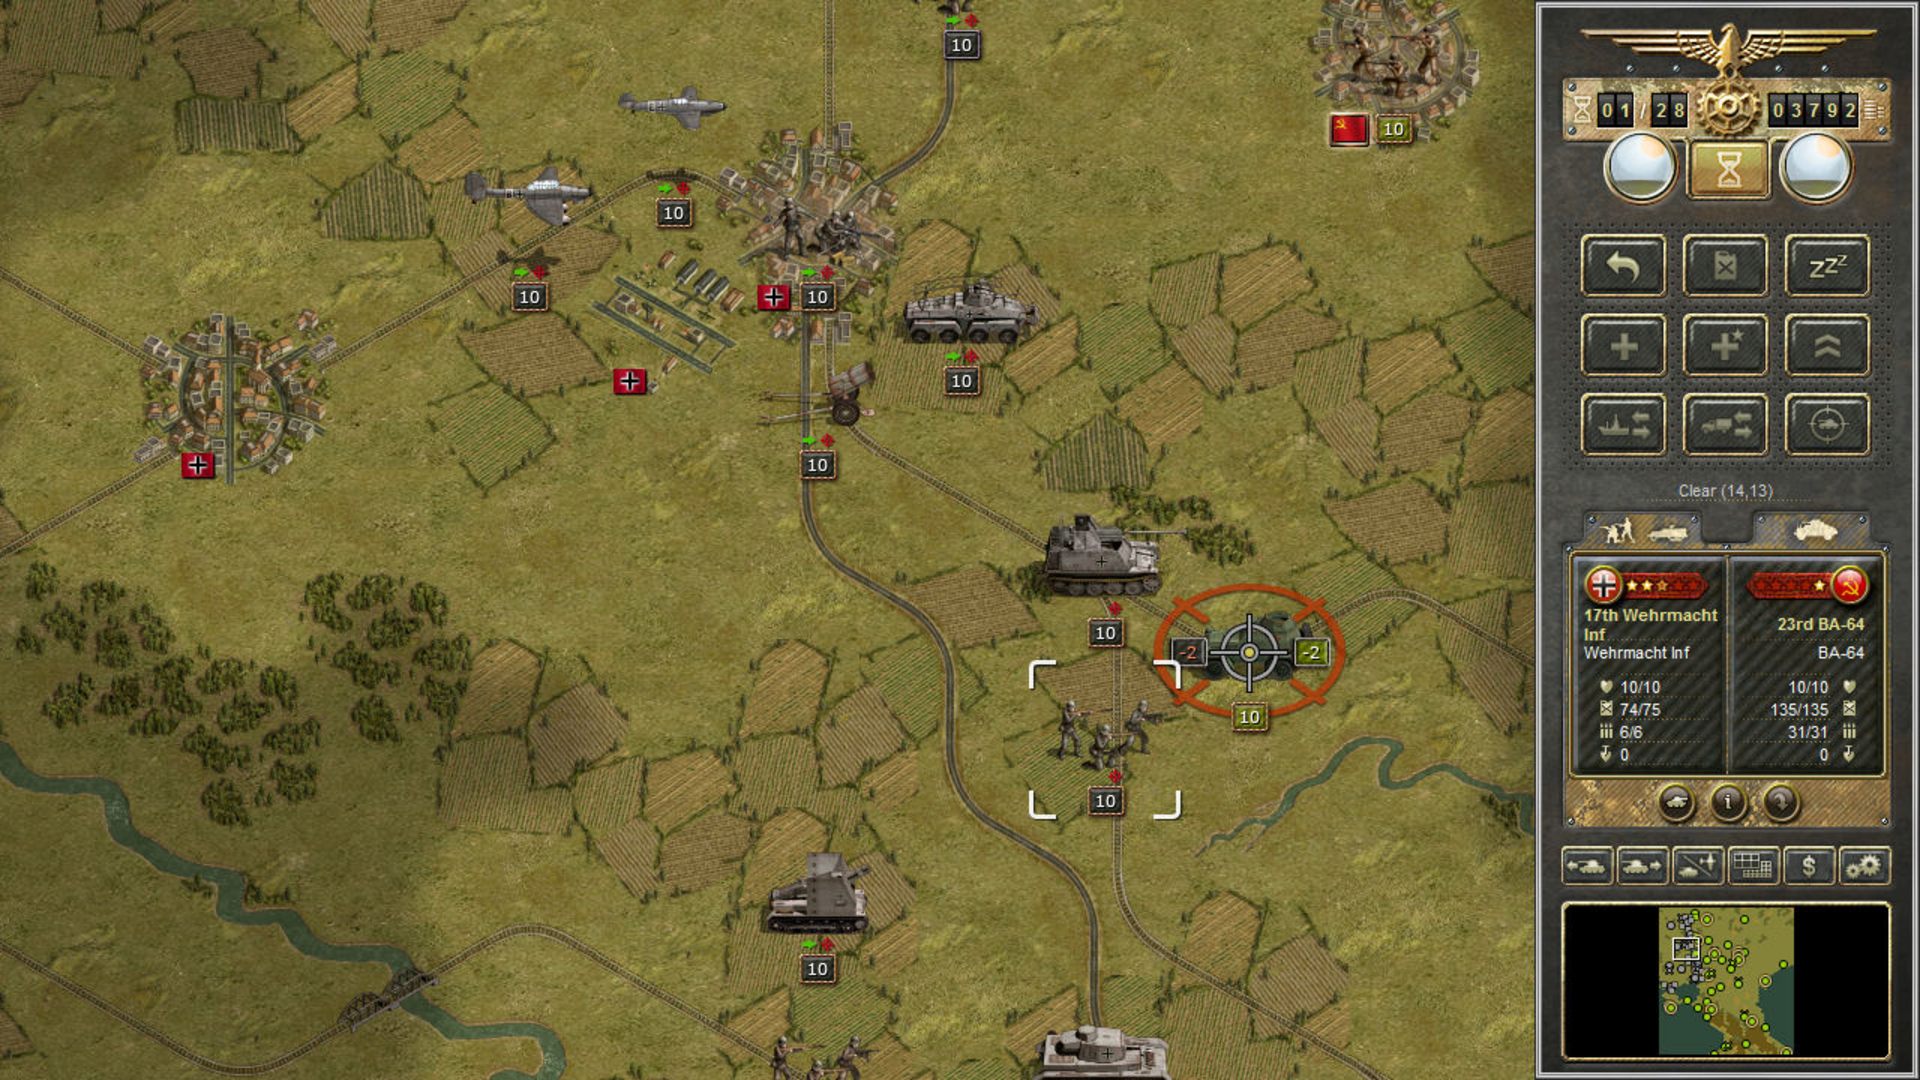 Best tank games: Panzer Corps. Image shows various tanks shown on a map of fields.